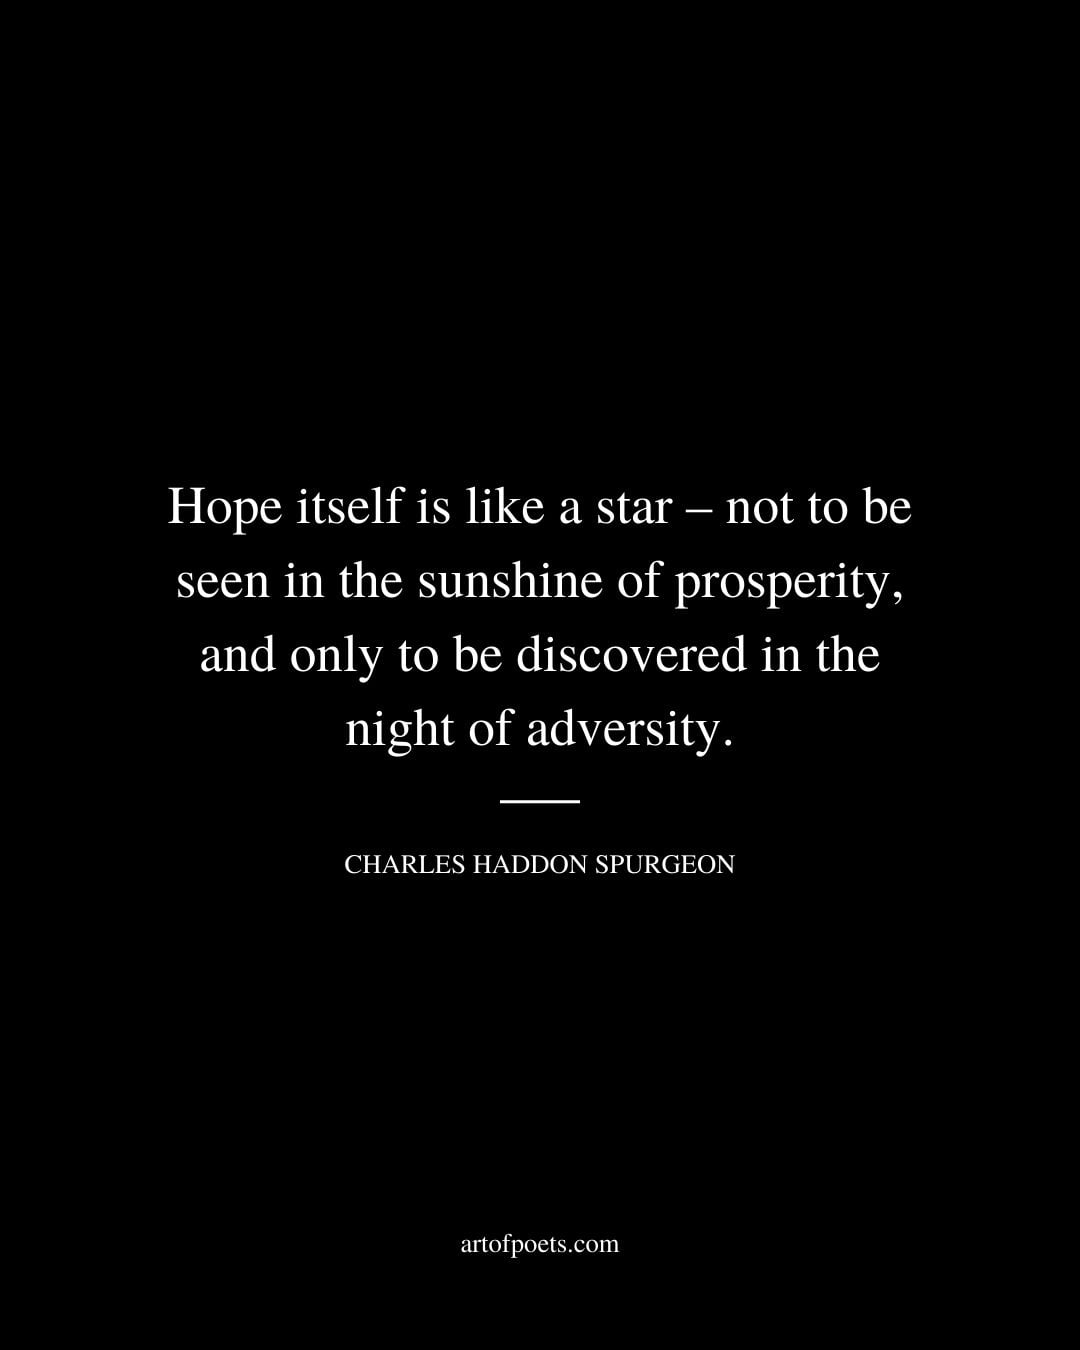 Hope itself is like a star – not to be seen in the sunshine of prosperity and only to be discovered in the night of adversity. Charles Haddon Spurgeon